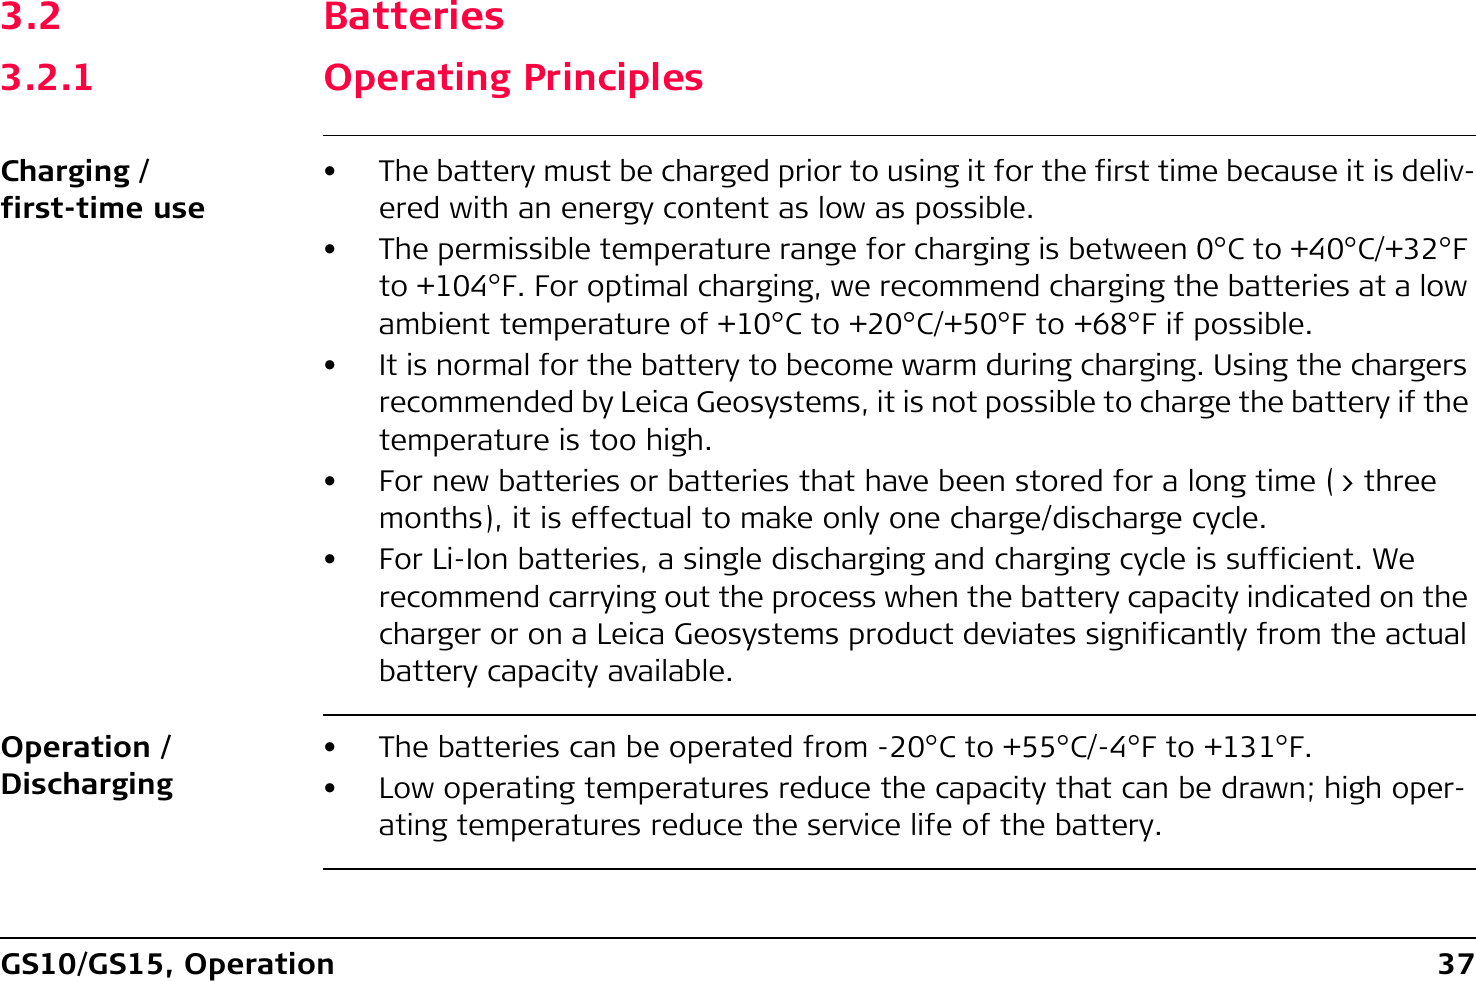 GS10/GS15, Operation 373.2 Batteries3.2.1 Operating PrinciplesCharging / first-time use• The battery must be charged prior to using it for the first time because it is deliv-ered with an energy content as low as possible.• The permissible temperature range for charging is between 0°C to +40°C/+32°F to +104°F. For optimal charging, we recommend charging the batteries at a low ambient temperature of +10°C to +20°C/+50°F to +68°F if possible.• It is normal for the battery to become warm during charging. Using the chargers recommended by Leica Geosystems, it is not possible to charge the battery if the temperature is too high.• For new batteries or batteries that have been stored for a long time (&gt; three months), it is effectual to make only one charge/discharge cycle.• For Li-Ion batteries, a single discharging and charging cycle is sufficient. We recommend carrying out the process when the battery capacity indicated on the charger or on a Leica Geosystems product deviates significantly from the actual battery capacity available.Operation / Discharging• The batteries can be operated from -20°C to +55°C/-4°F to +131°F.• Low operating temperatures reduce the capacity that can be drawn; high oper-ating temperatures reduce the service life of the battery.